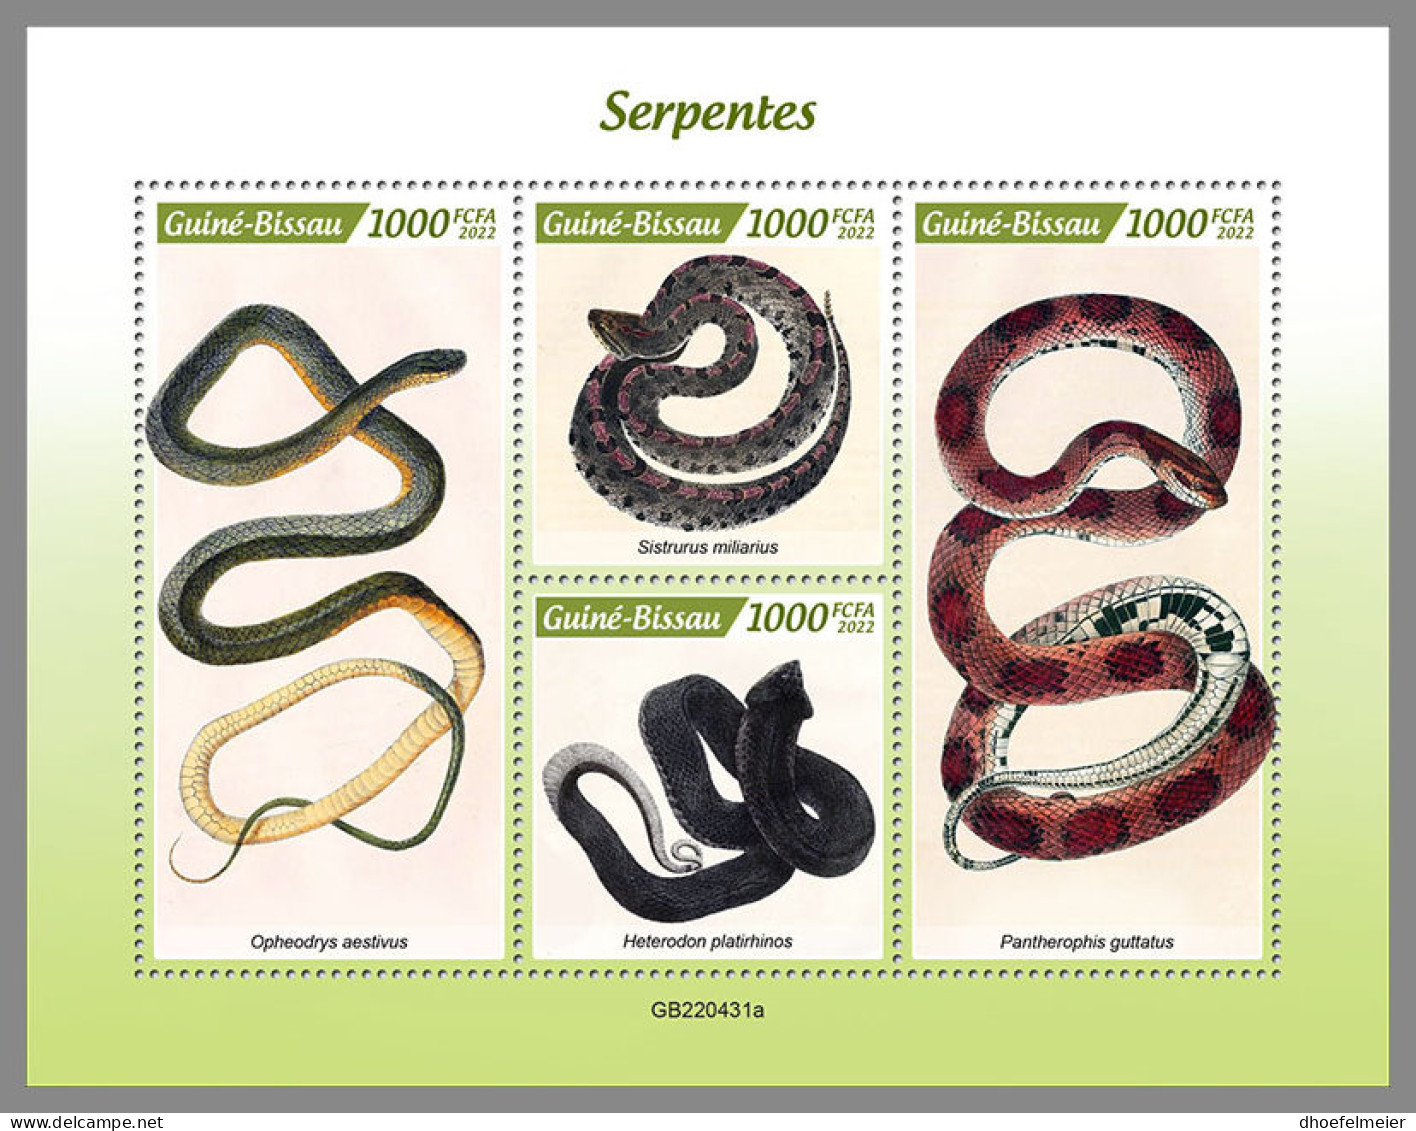 GUINEA BISSAU 2022 MNH Snakes Schlangen Serpents M/S - OFFICIAL ISSUE - DHQ2324 - Serpents